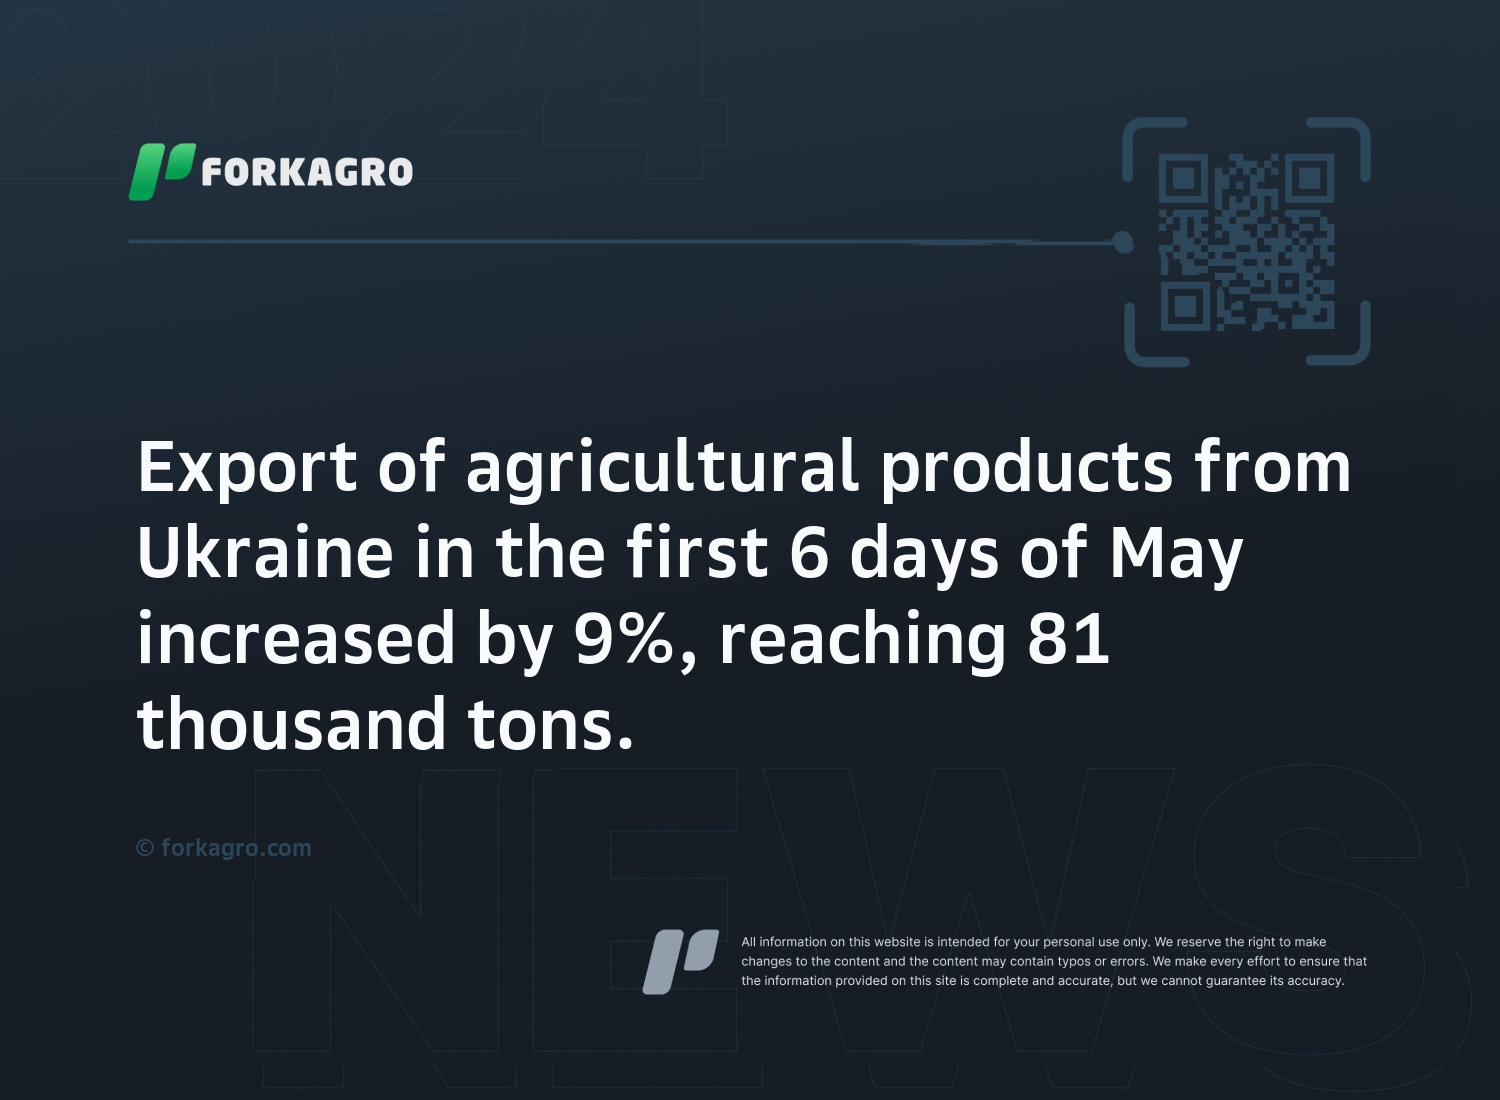 Export of agricultural products from Ukraine in the first 6 days of May increased by 9%, reaching 81 thousand tons.